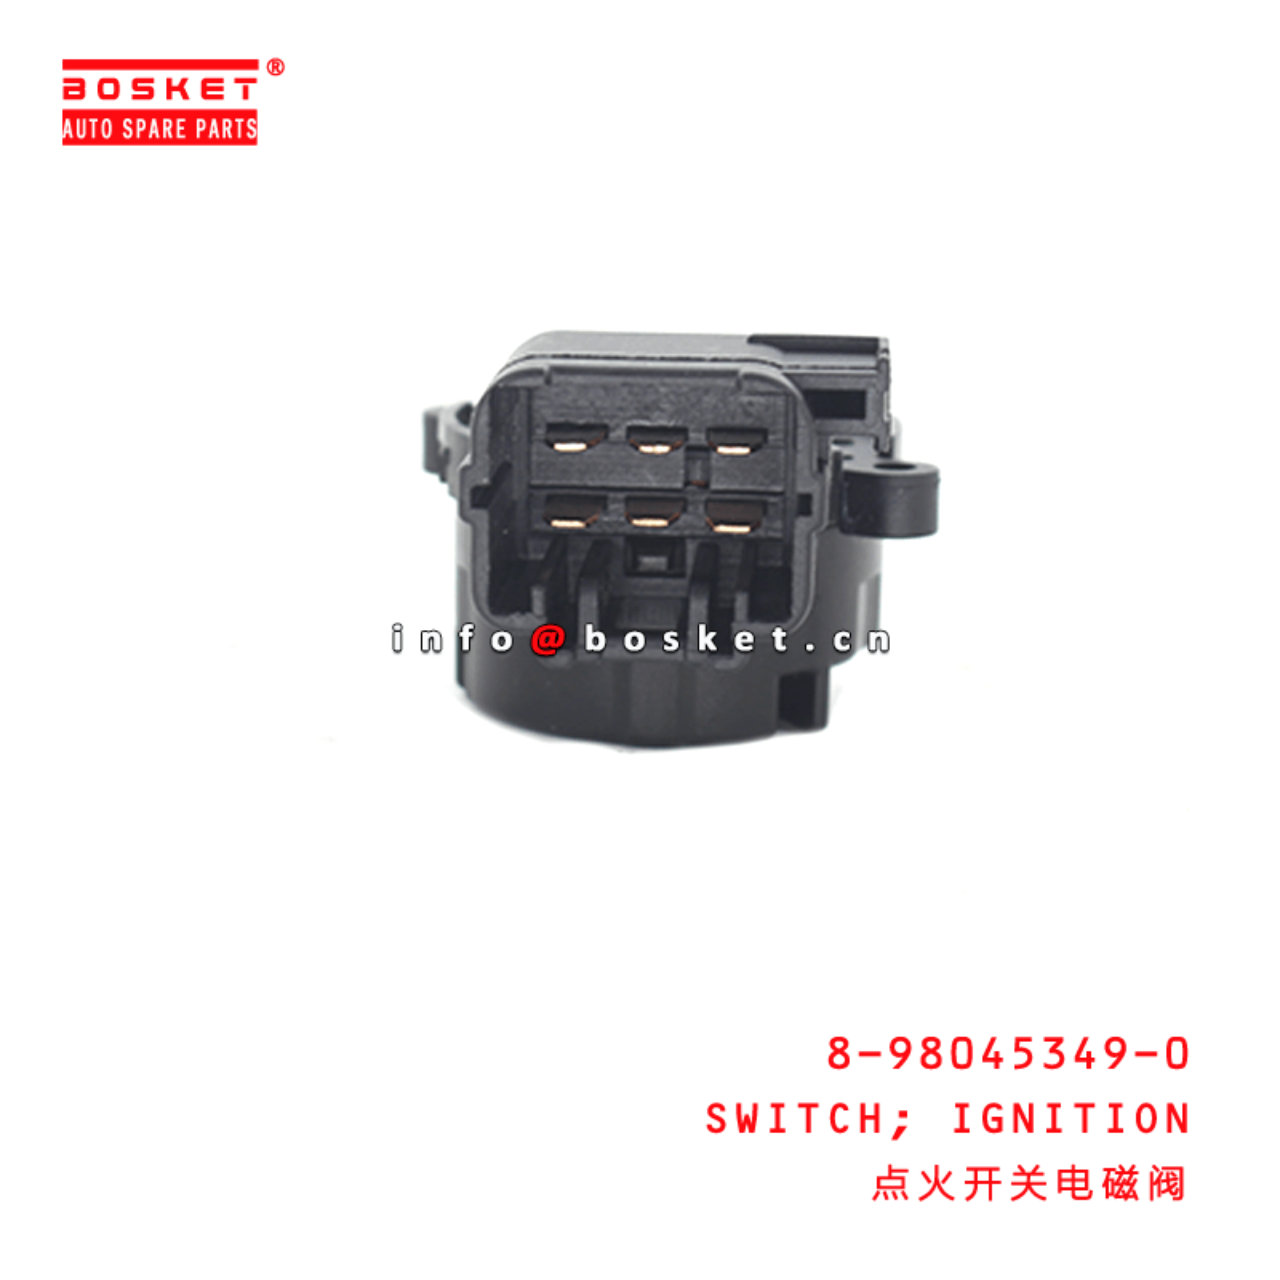 8-98045349-0 Ignition Switch 8980453490 Suitable for ISUZU 700P 4HK1